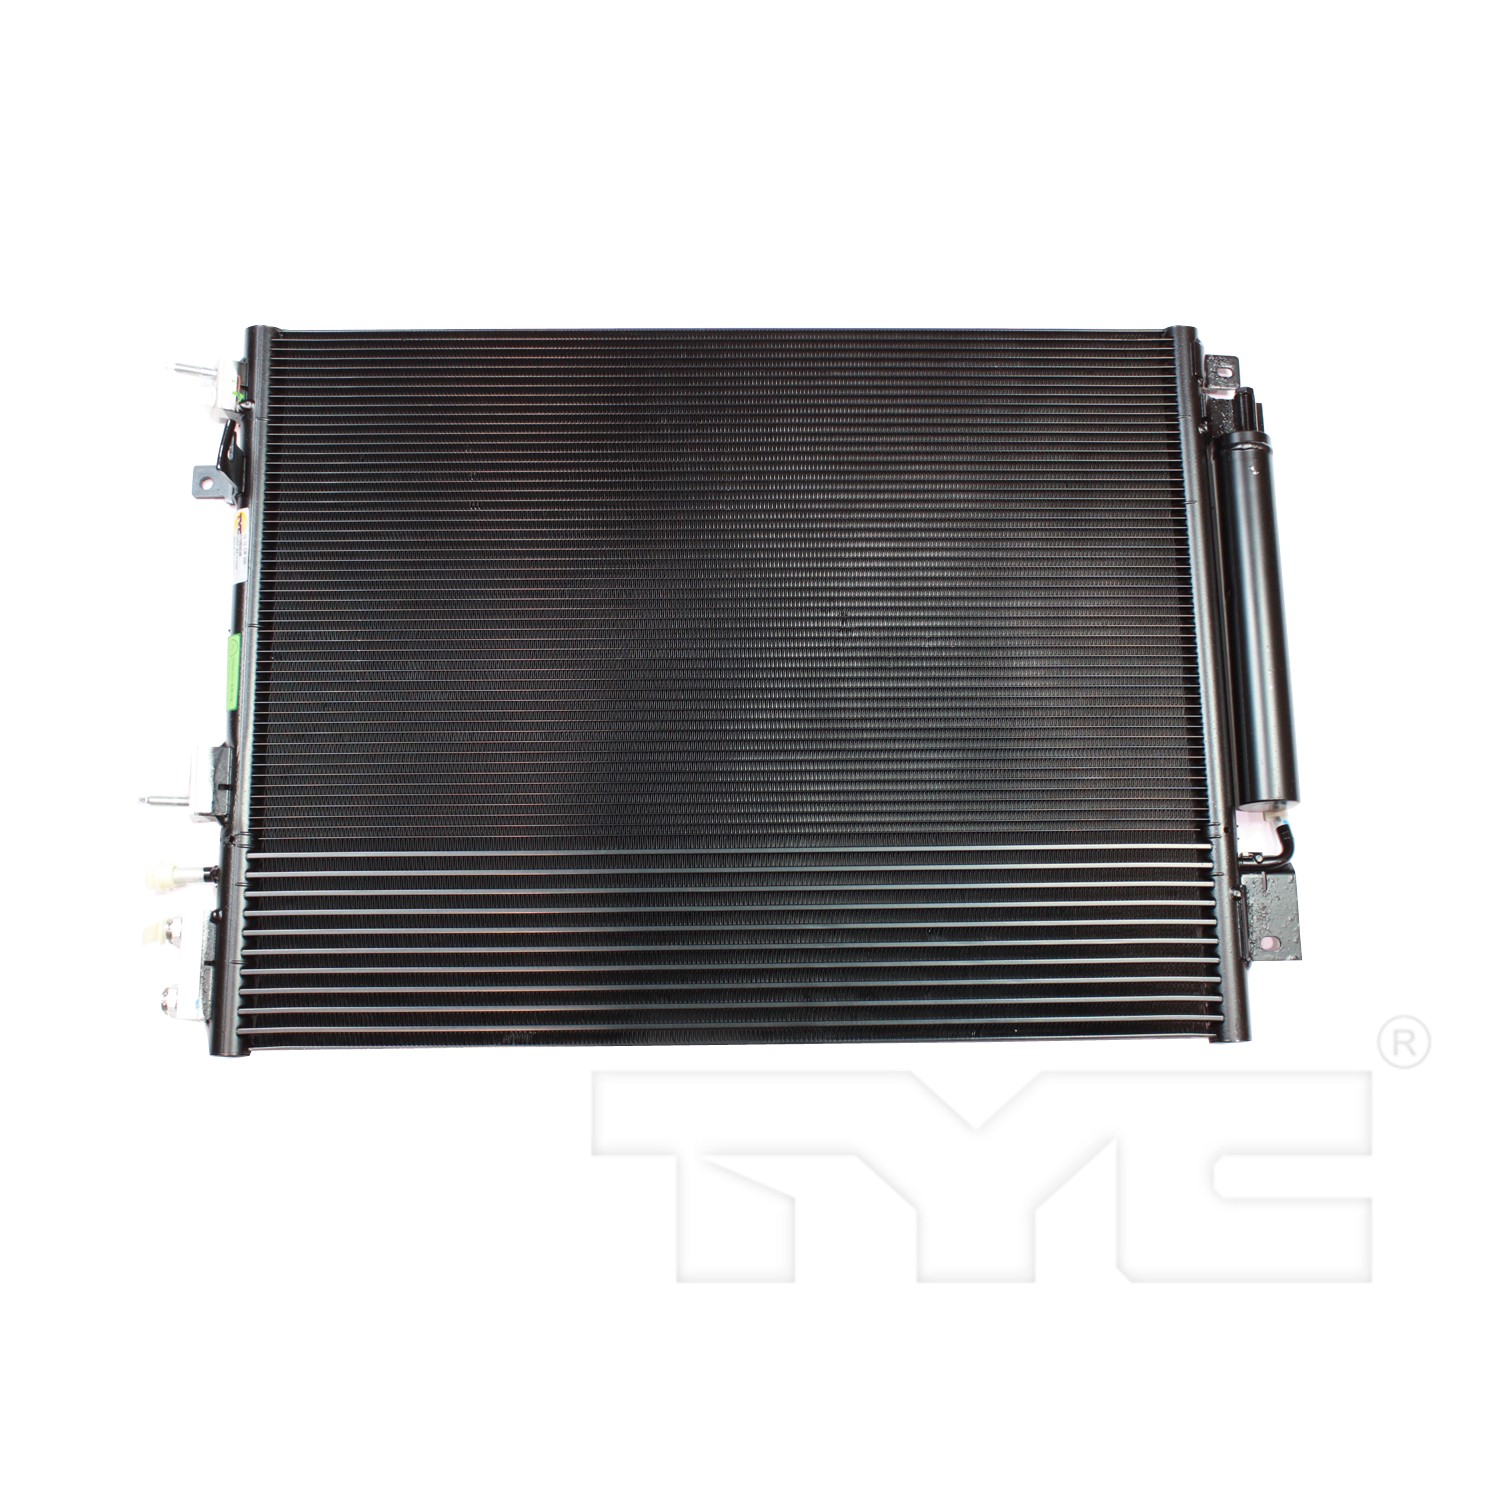 Aftermarket AC CONDENSERS for DODGE - CHARGER, CHARGER,09-10,Air conditioning condenser